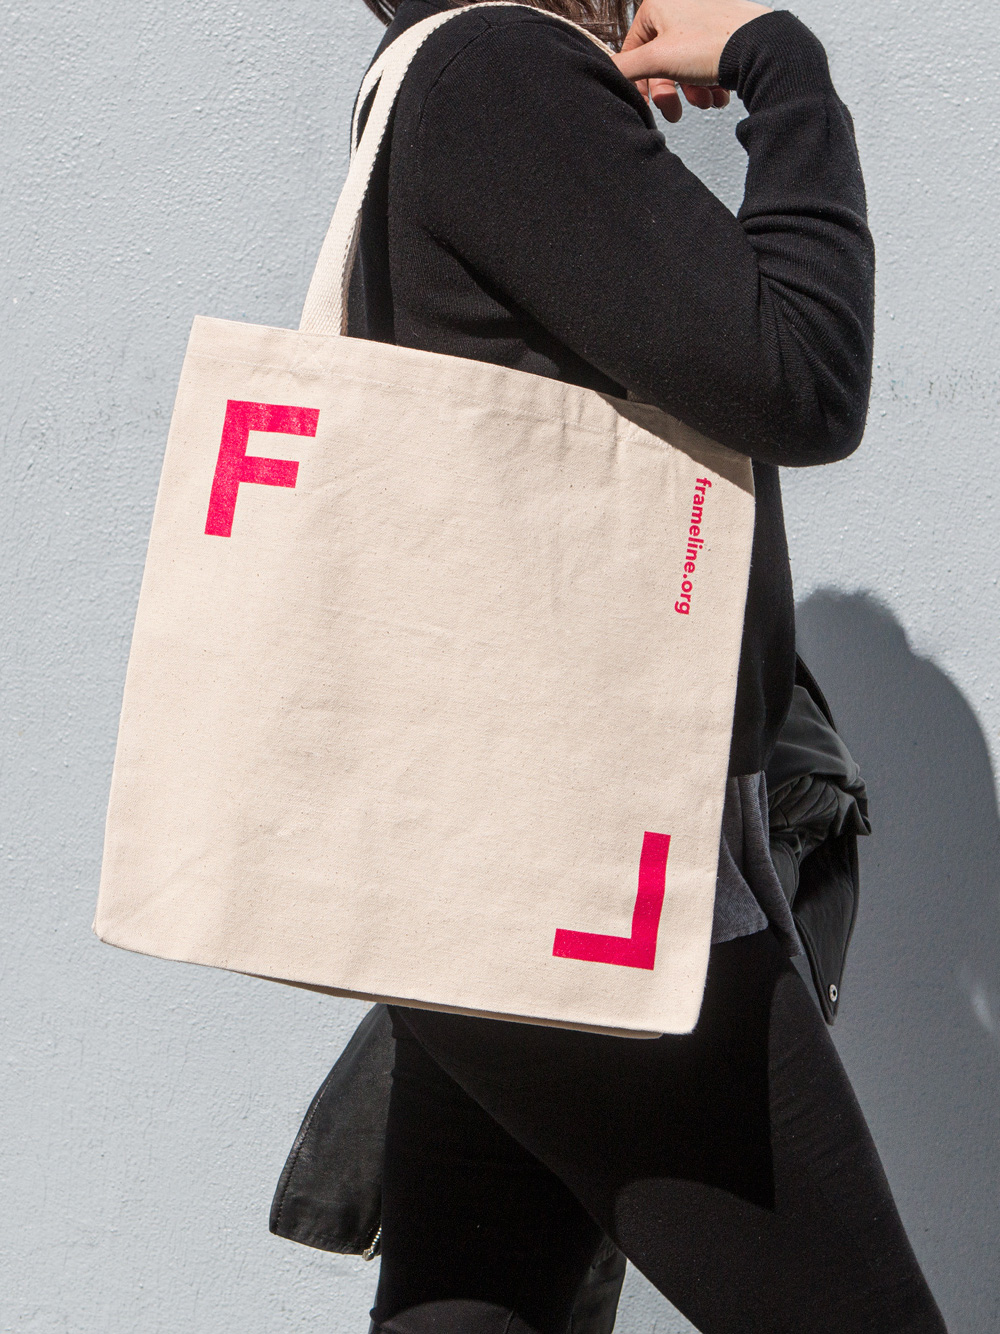 Brand New: New Logo and Identity for Frameline by Mucho